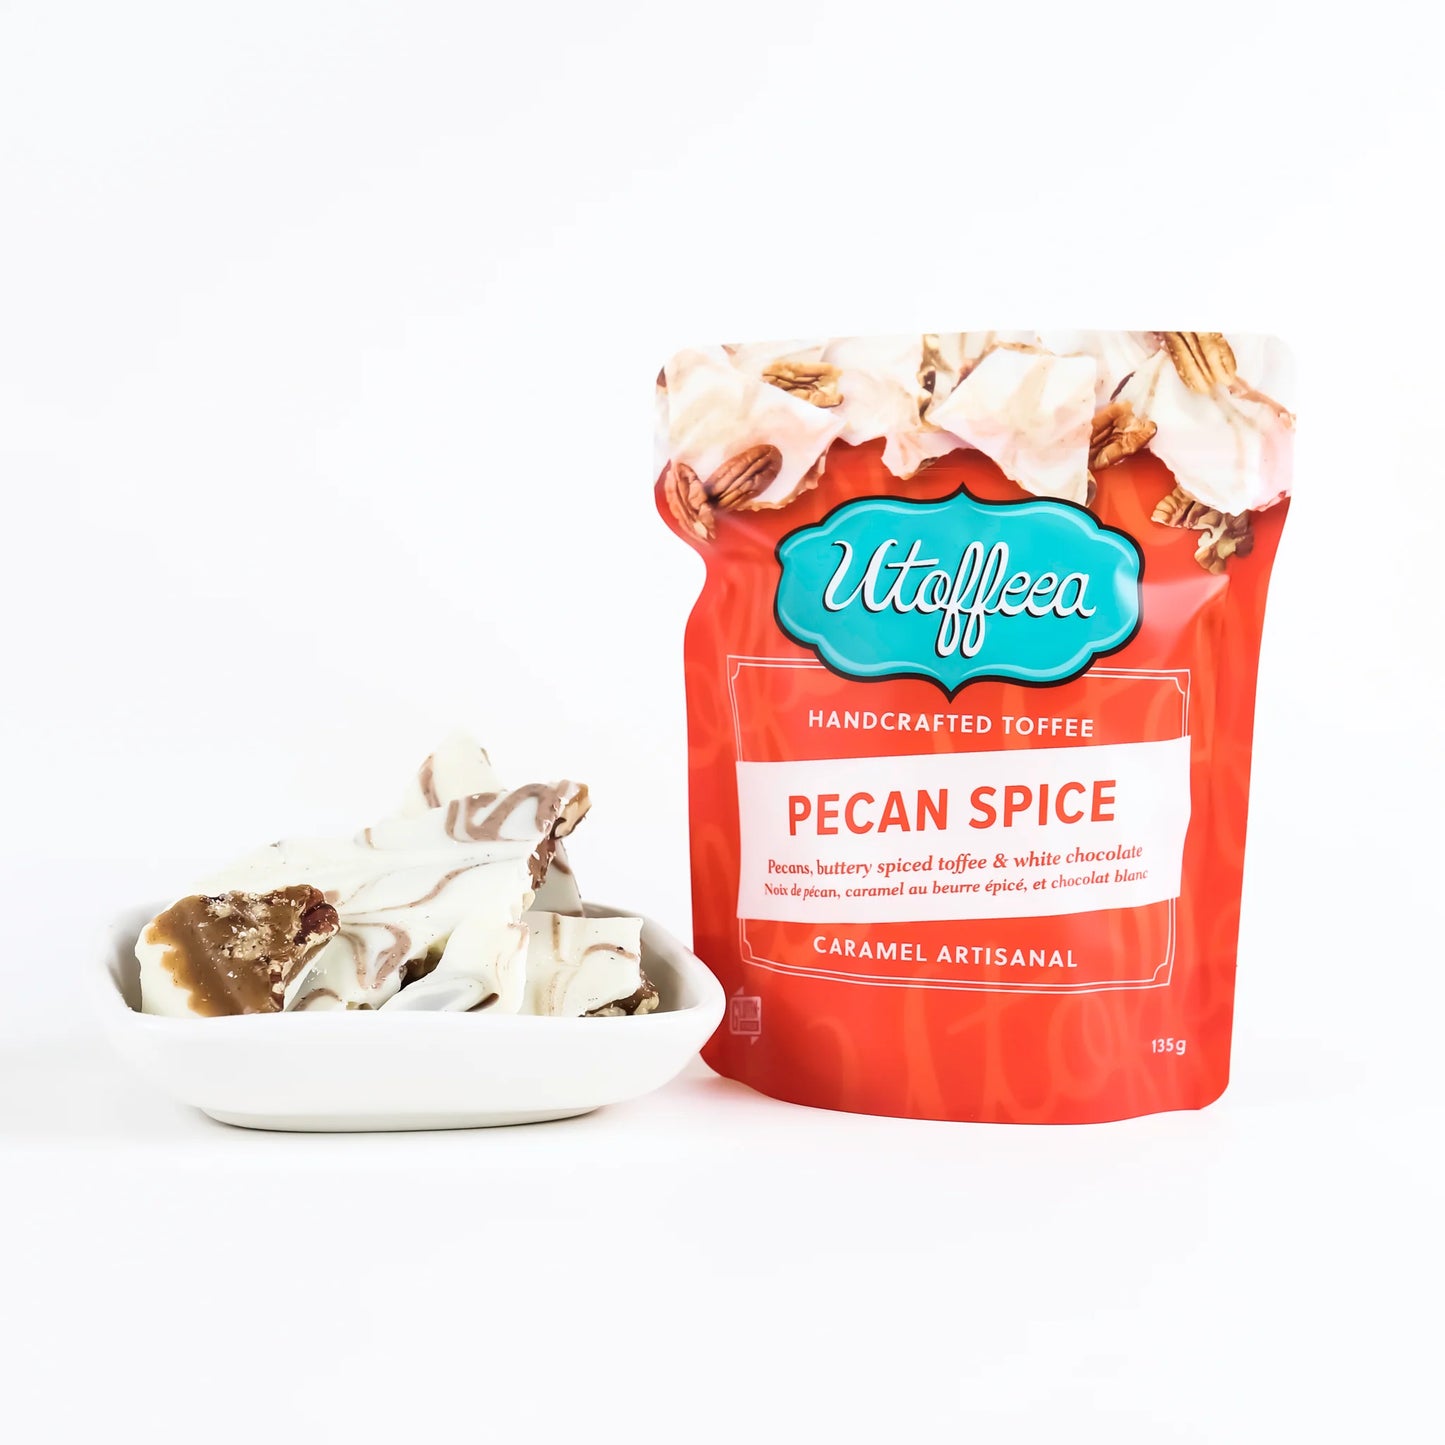 Handcrafted Toffee - Pecan Spice